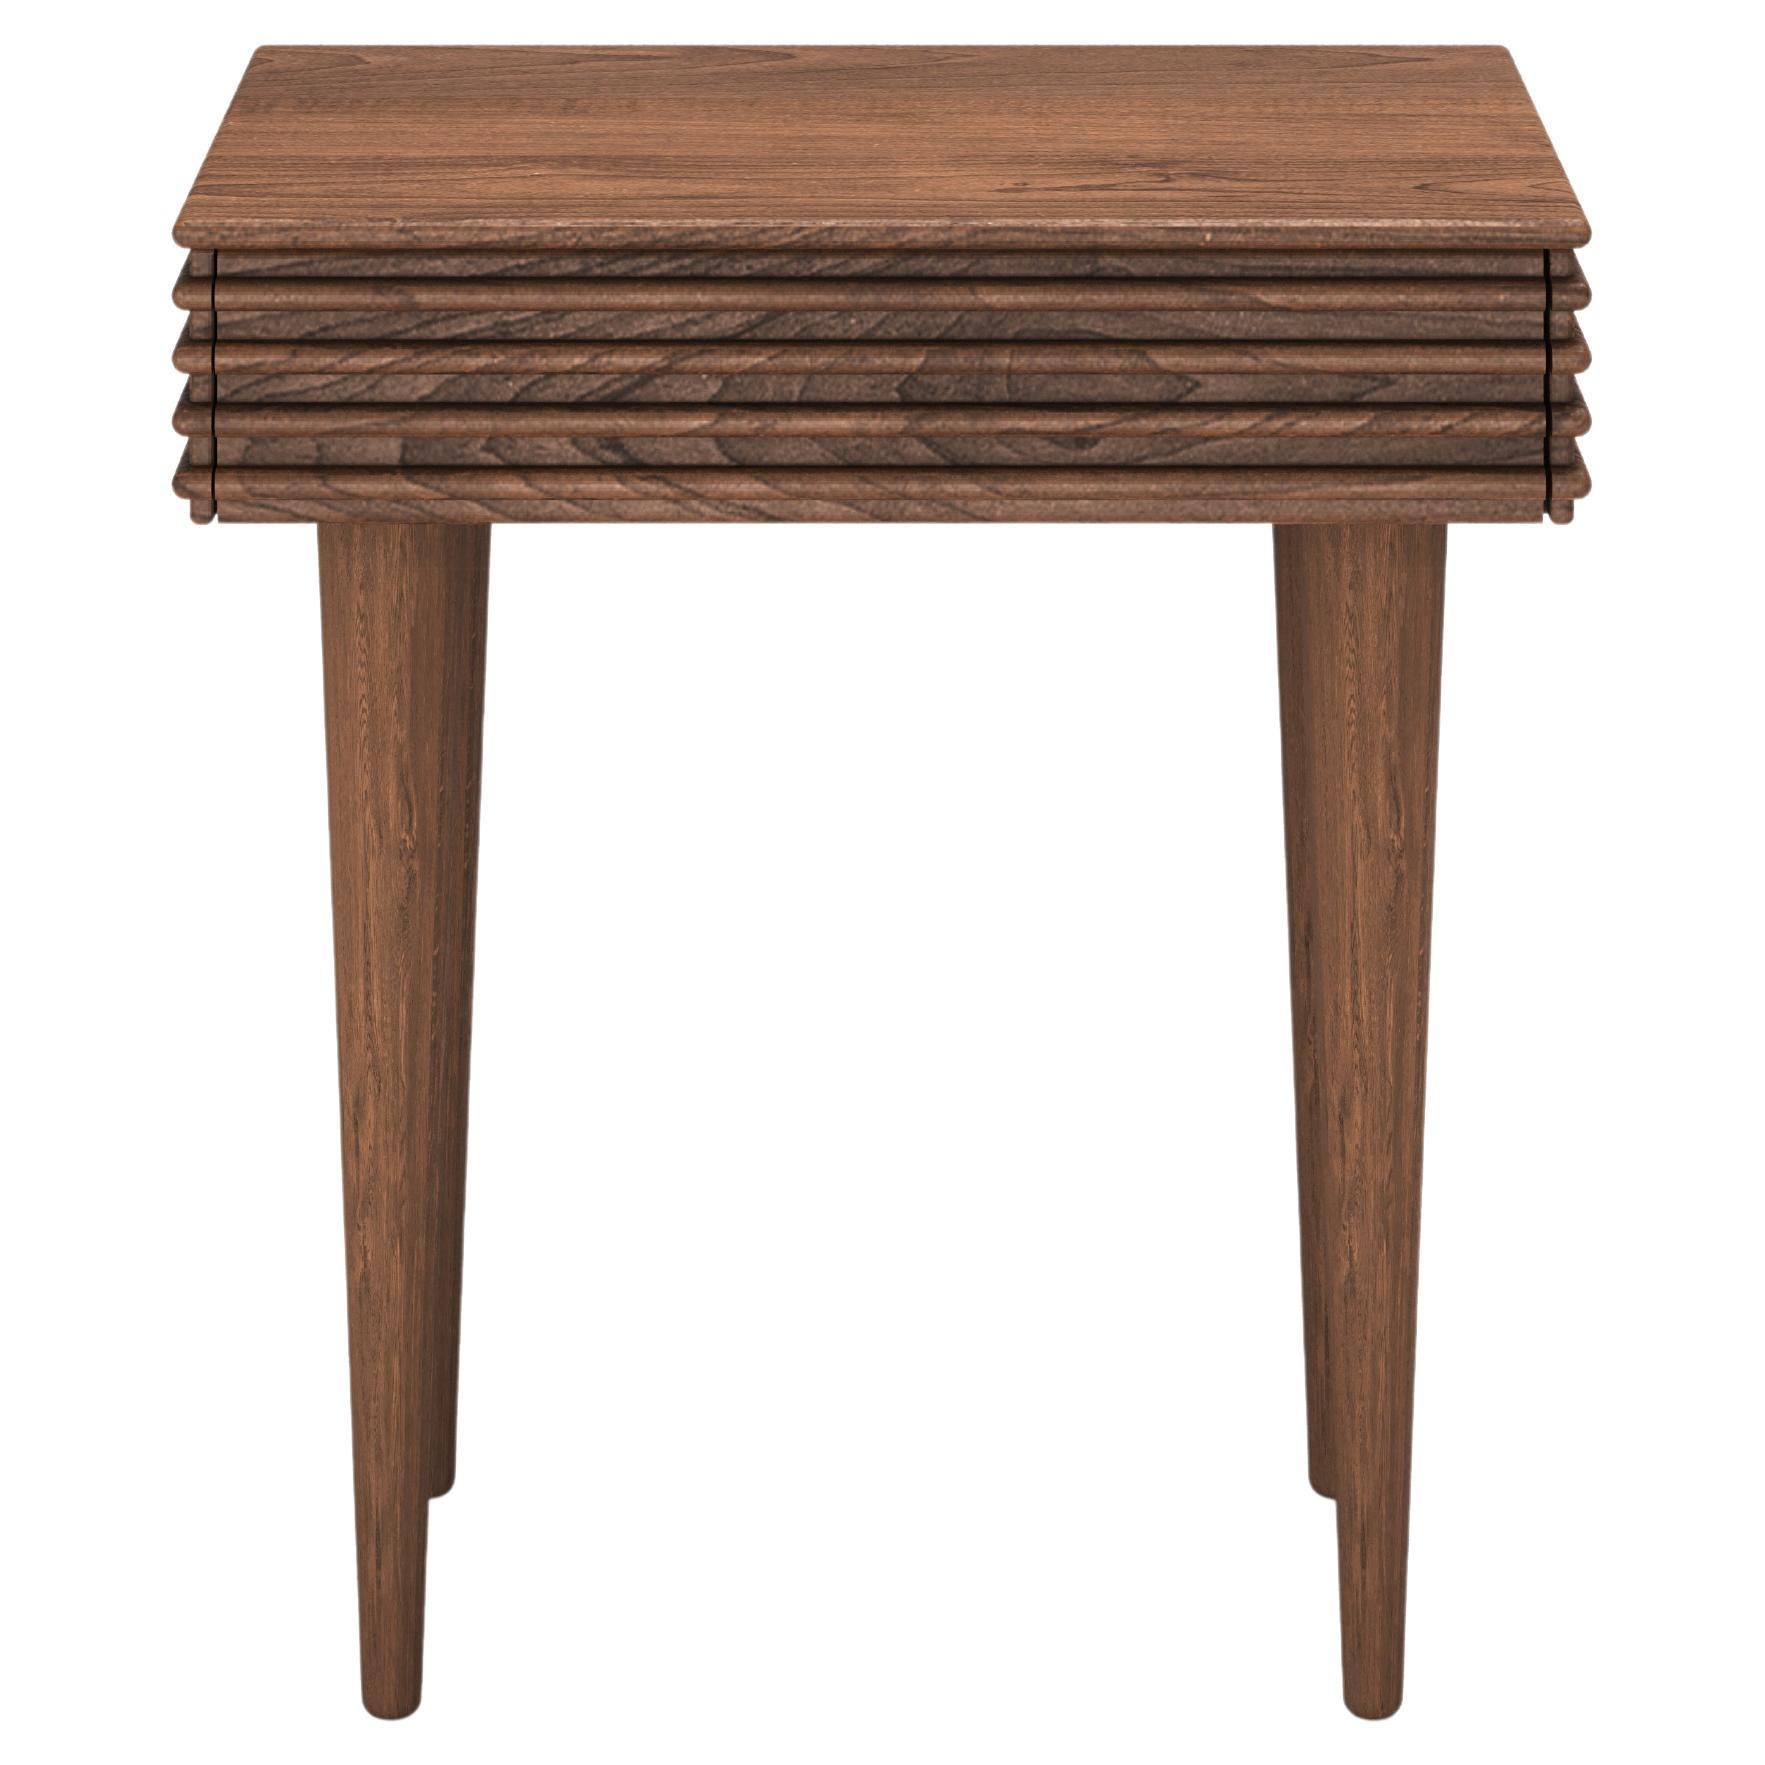 Contemporary Night Table 'Groove' by DK3, Walnut, L 50 cm, More Wood Finishes